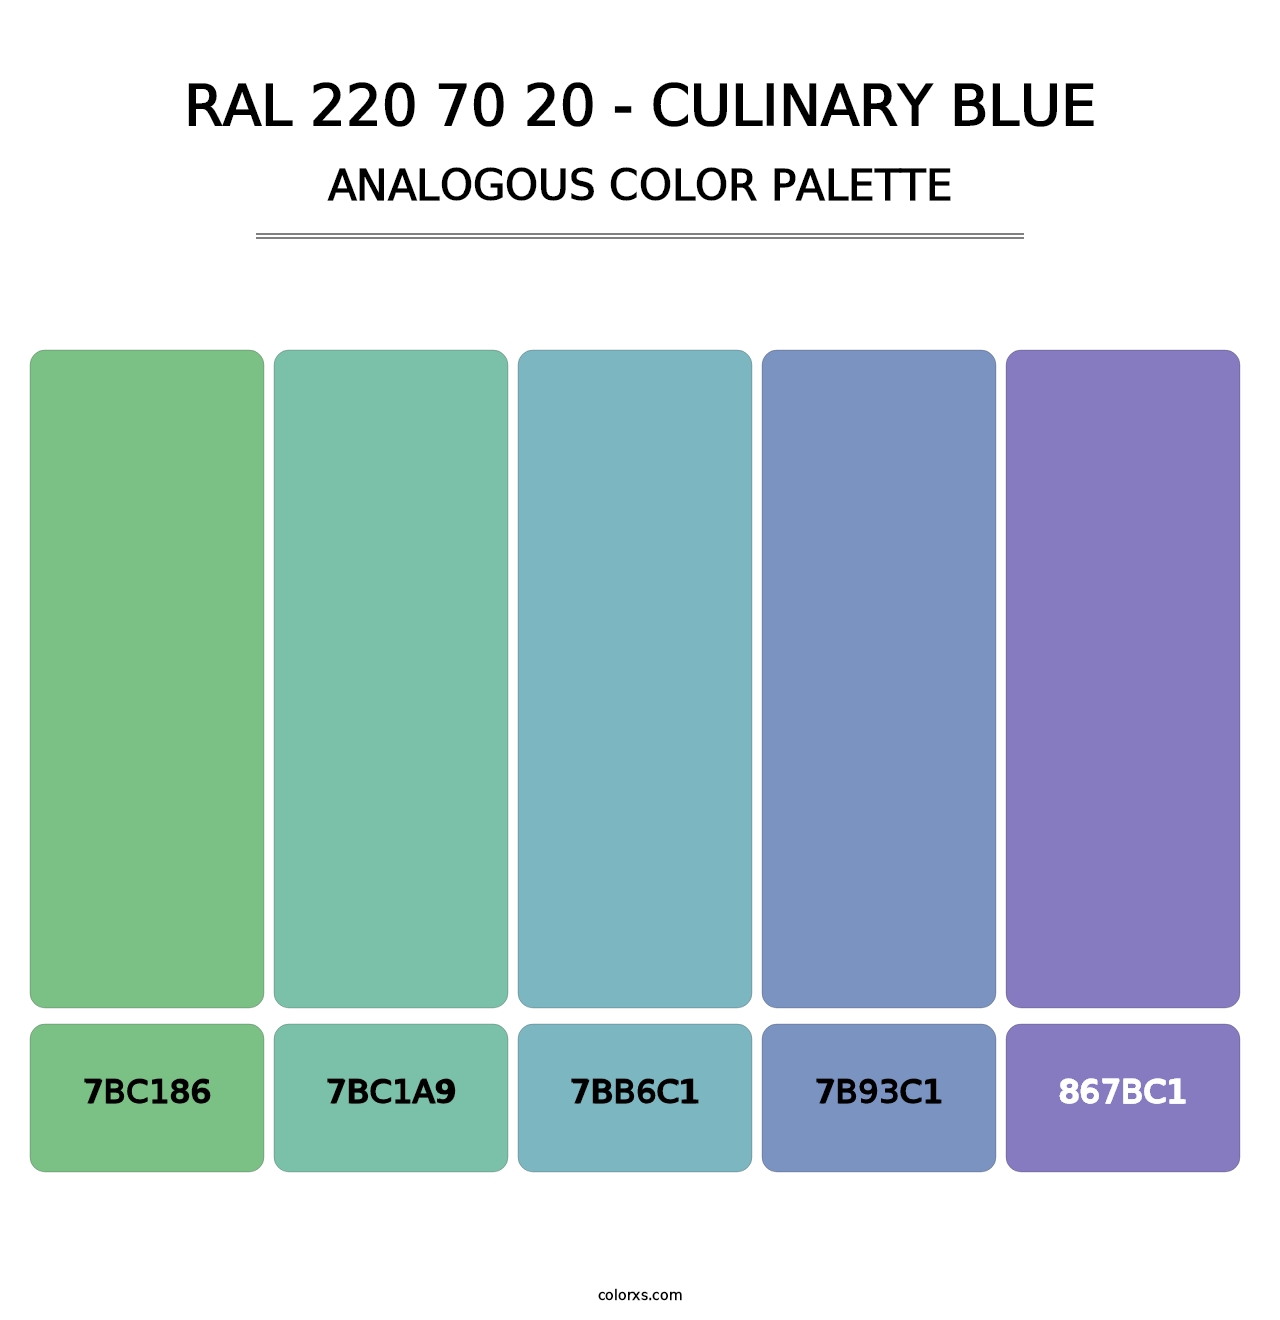 RAL 220 70 20 - Culinary Blue - Analogous Color Palette